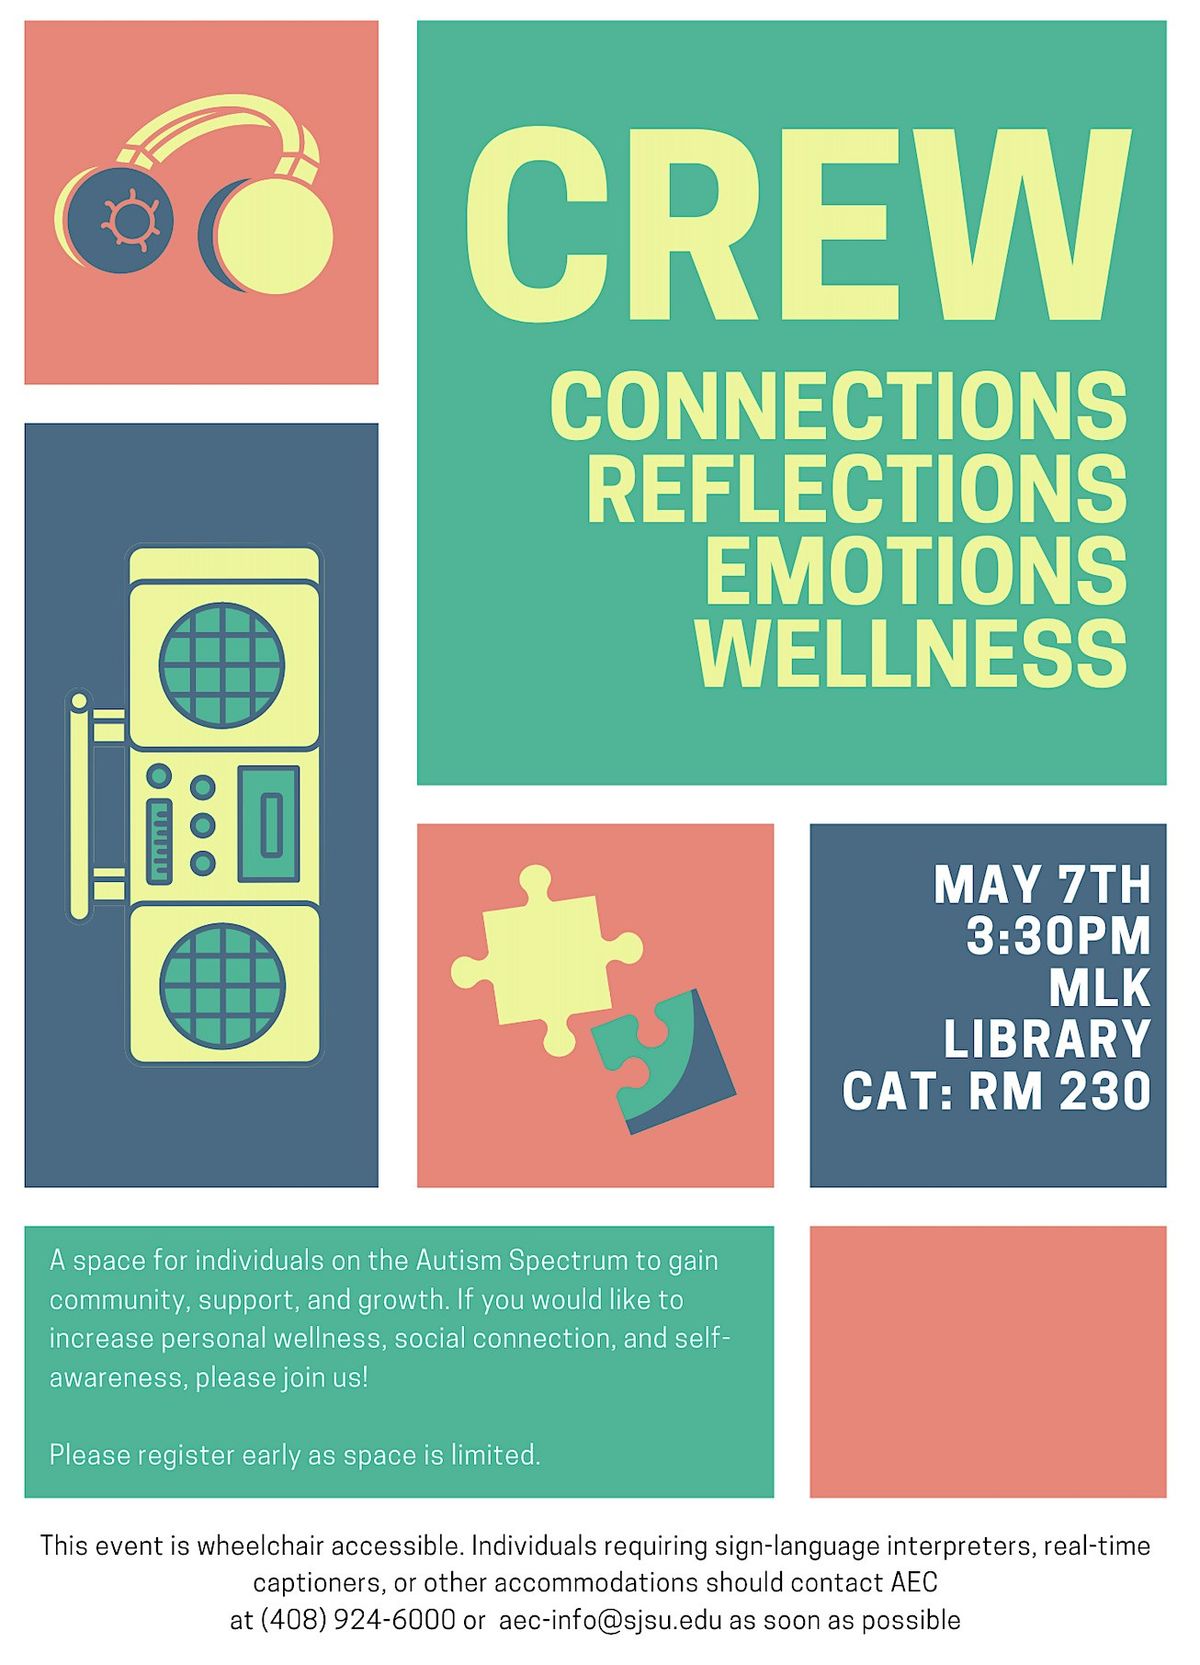 CREW - Connections, Reflections, Emotions, Wellness